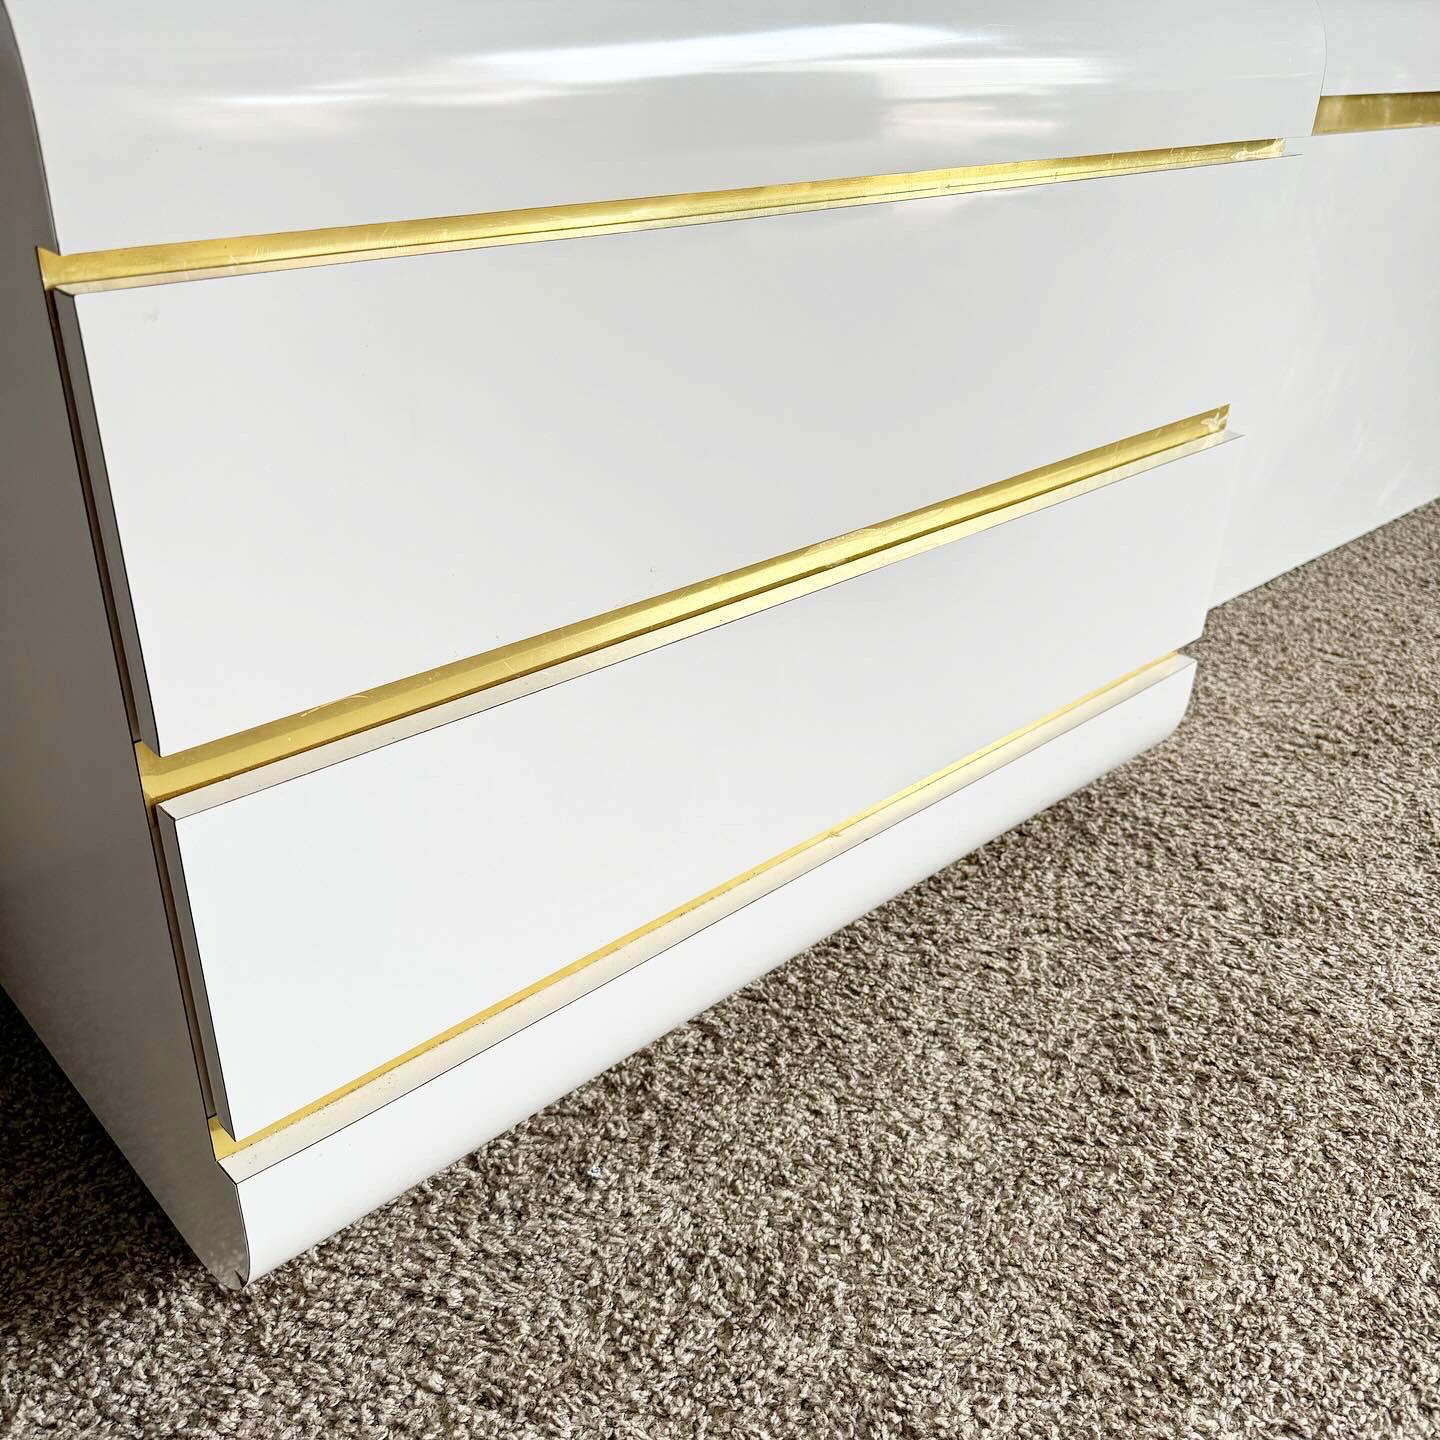 Postmodern White Lacquer Laminate King Storage Waterfall Headboard & Nightstands In Good Condition For Sale In Delray Beach, FL